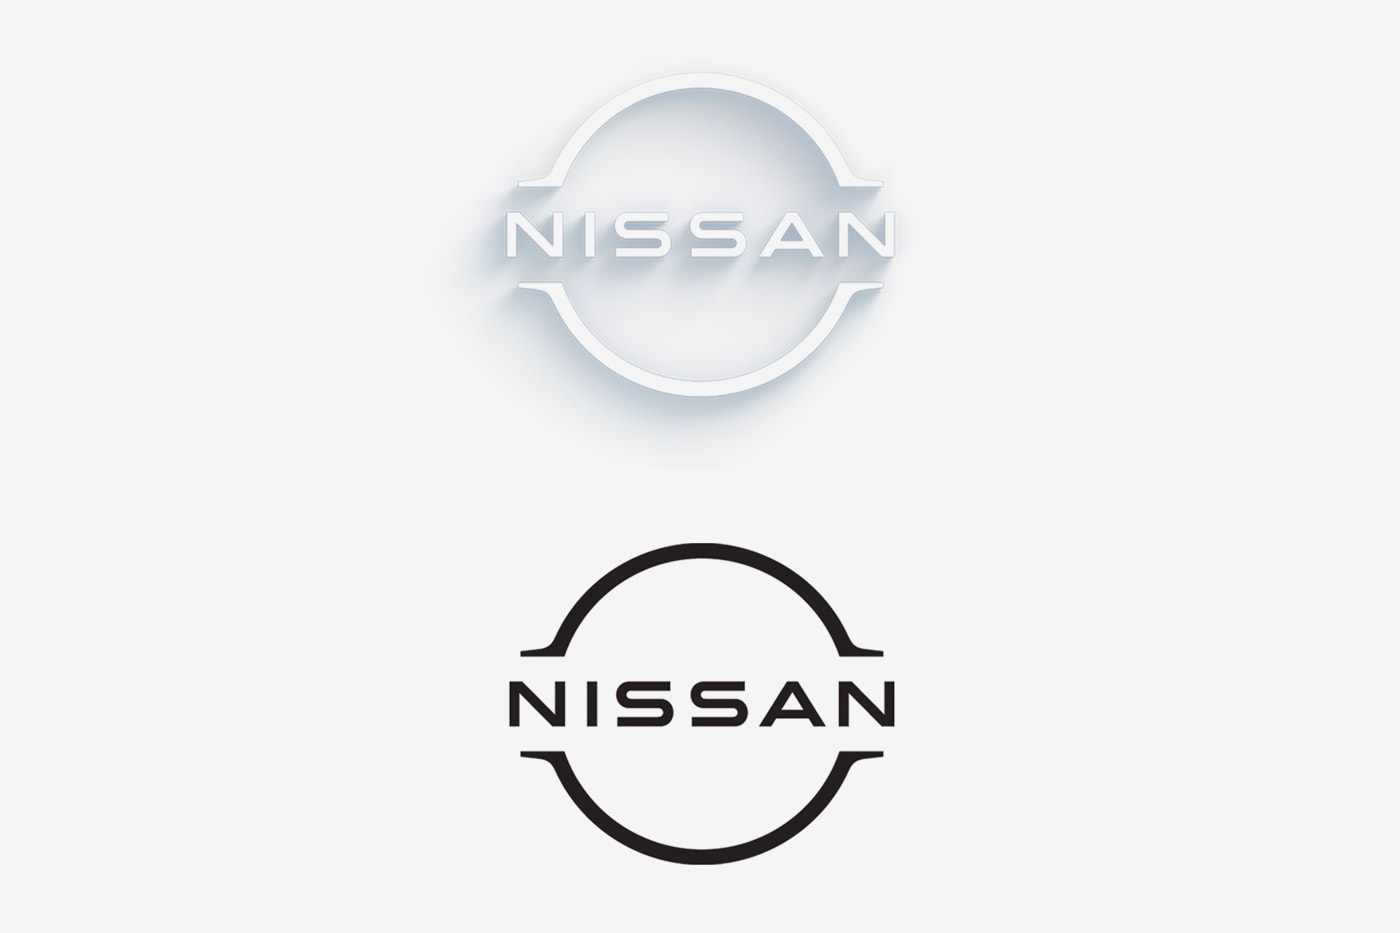 Nissan New 2020 Redesigned Logo Badge Unveil Info